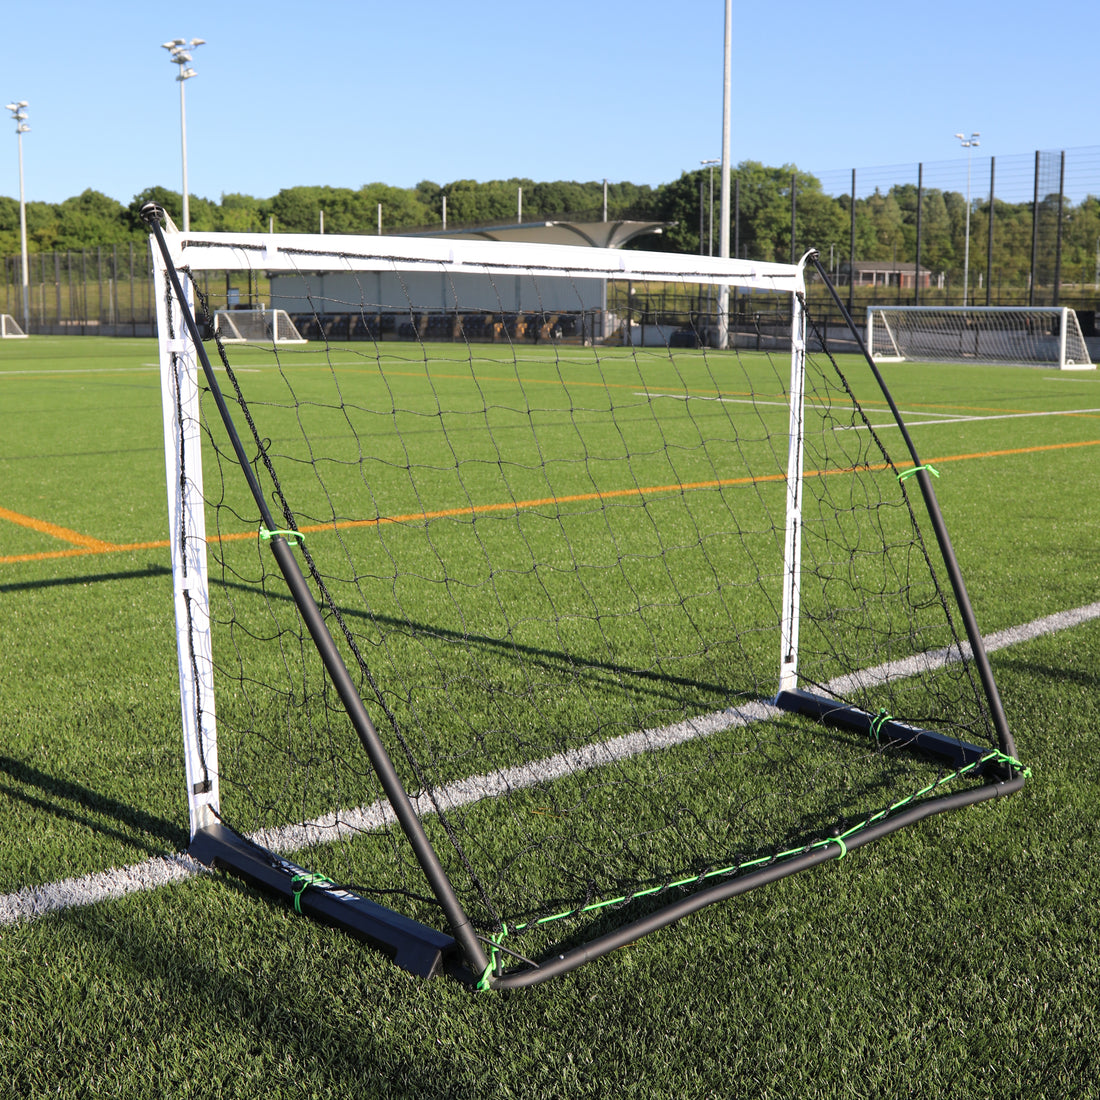 KICKSTER Base Weight (Set of 2) Small Goal Sizes: 5x3' > 8x5' - Works with goals purchased after Apr '23